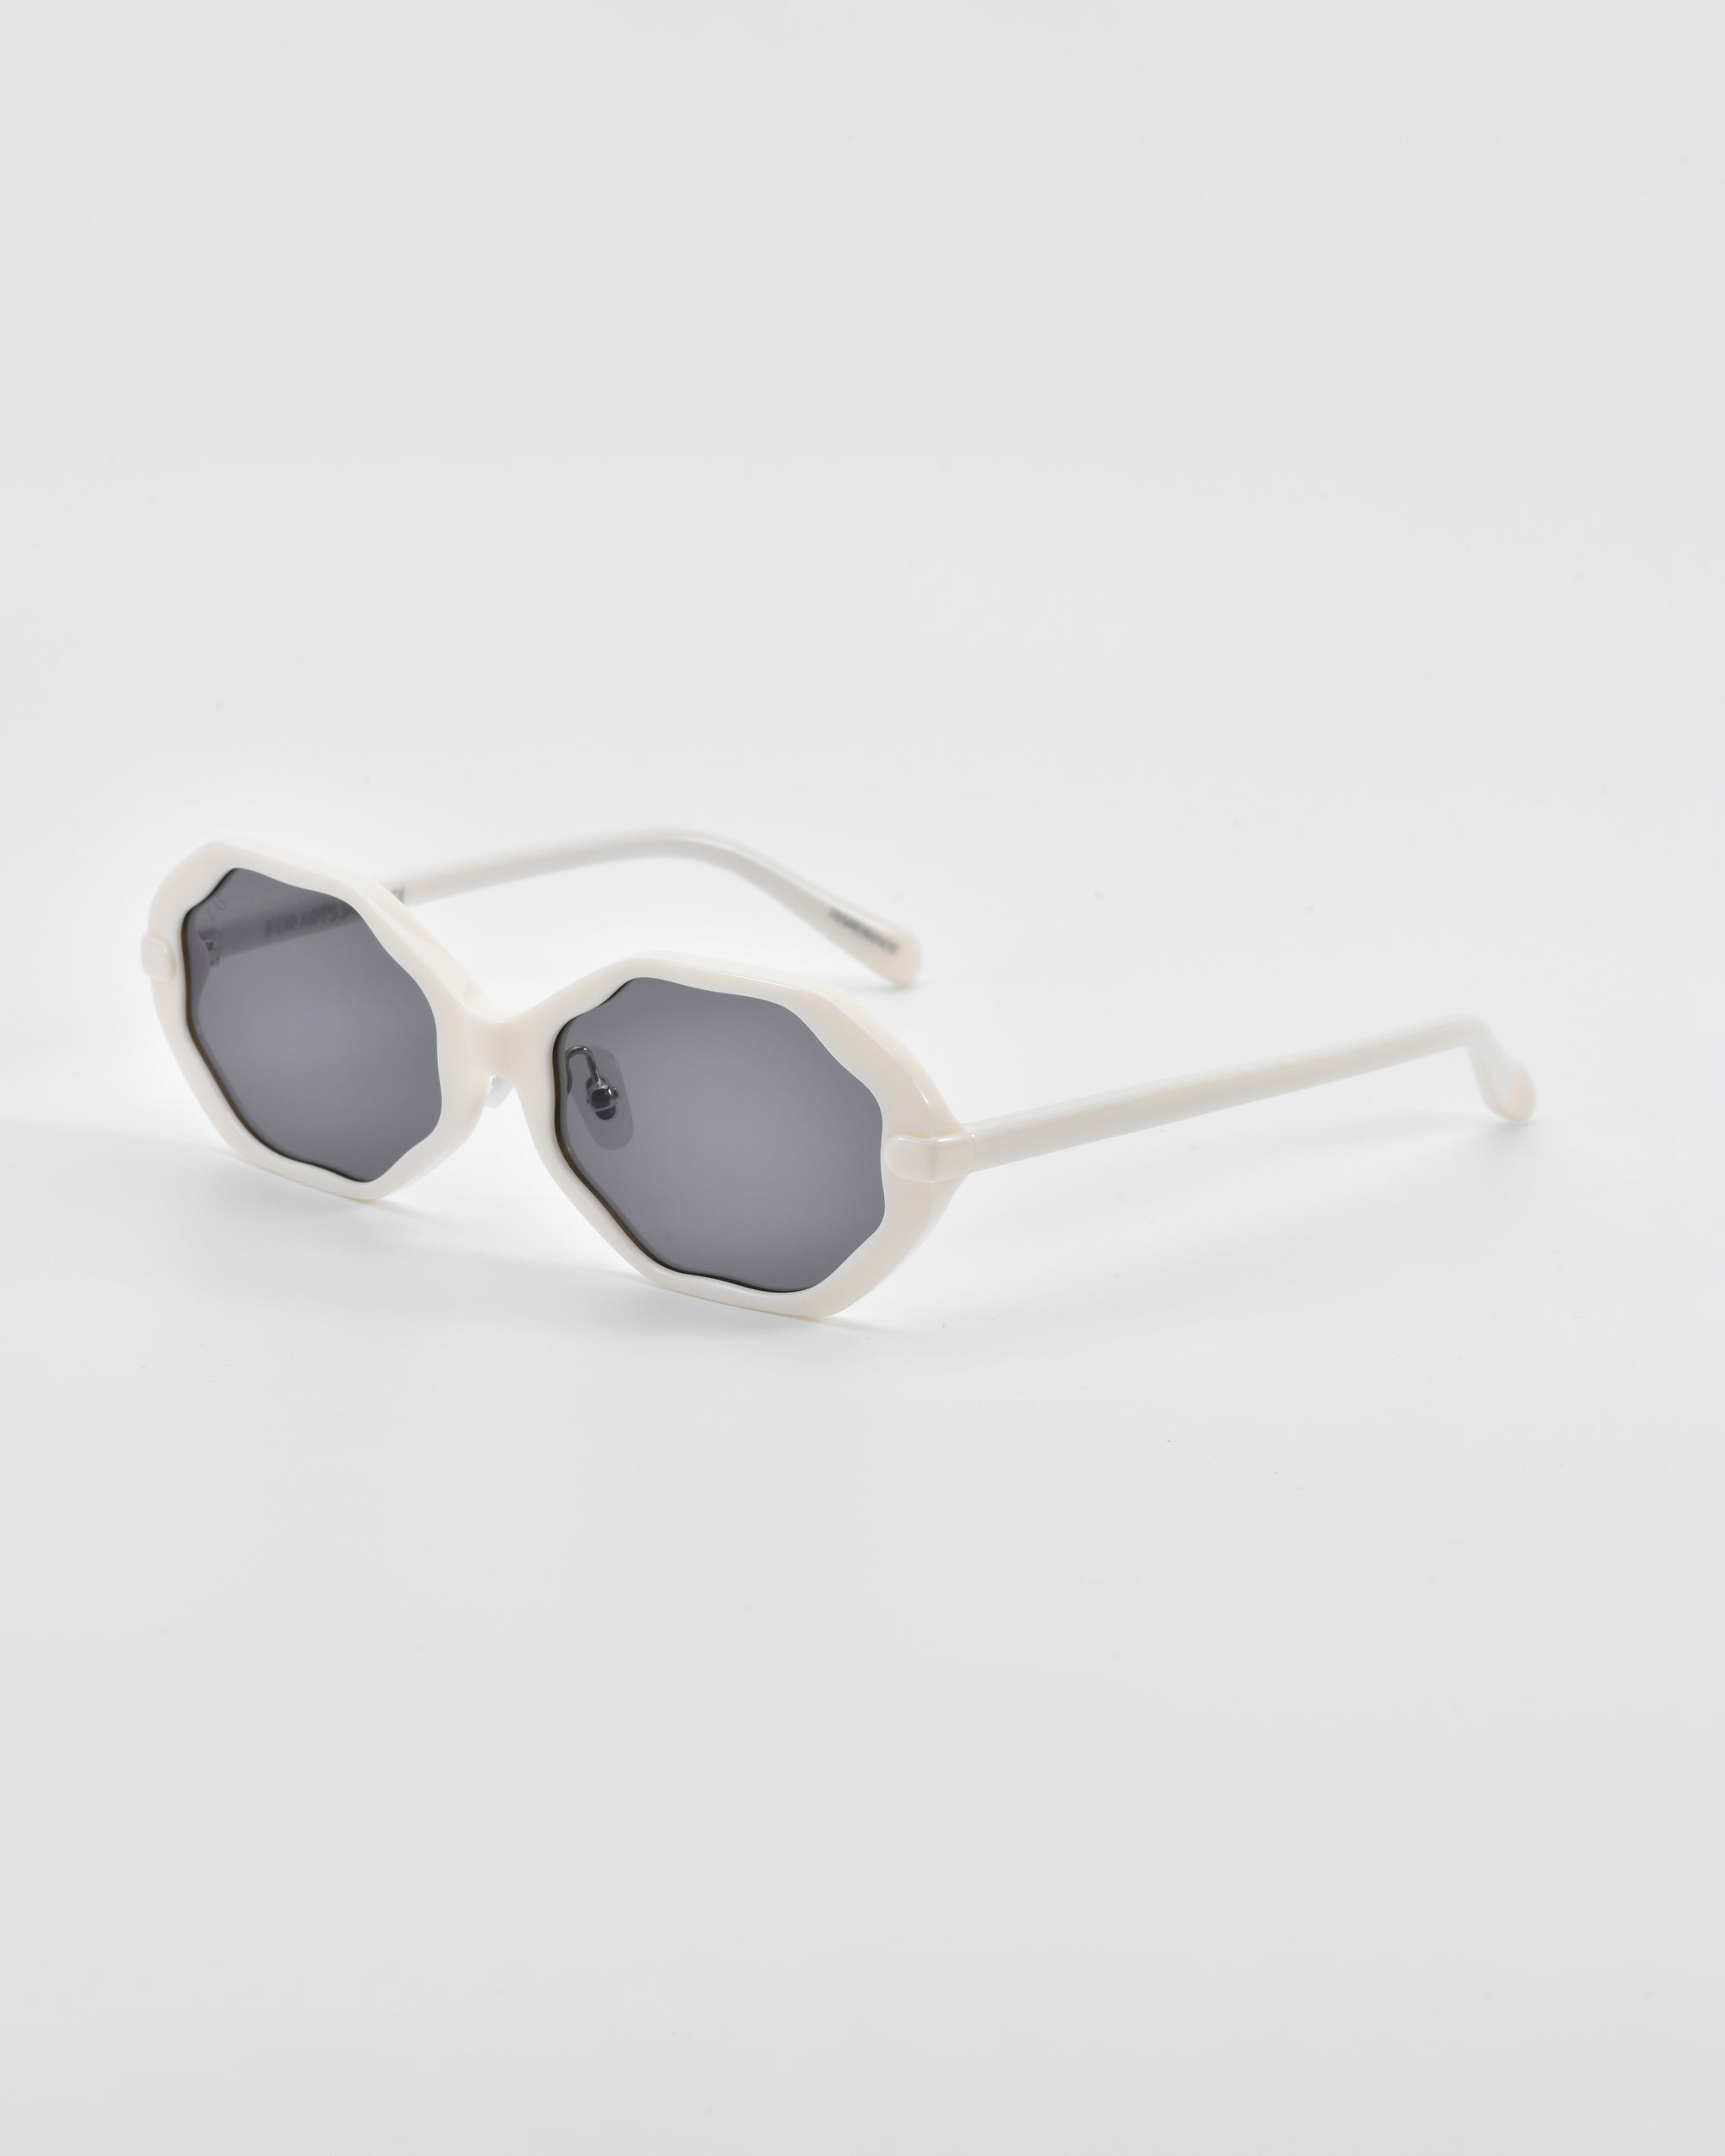 A pair of For Art&#39;s Sake® Lotus sunglasses with white, scalloped-edge frames and dark tinted lenses. They have thin, straight arms and jade-stone nose pads, positioned against a plain, light gray background.